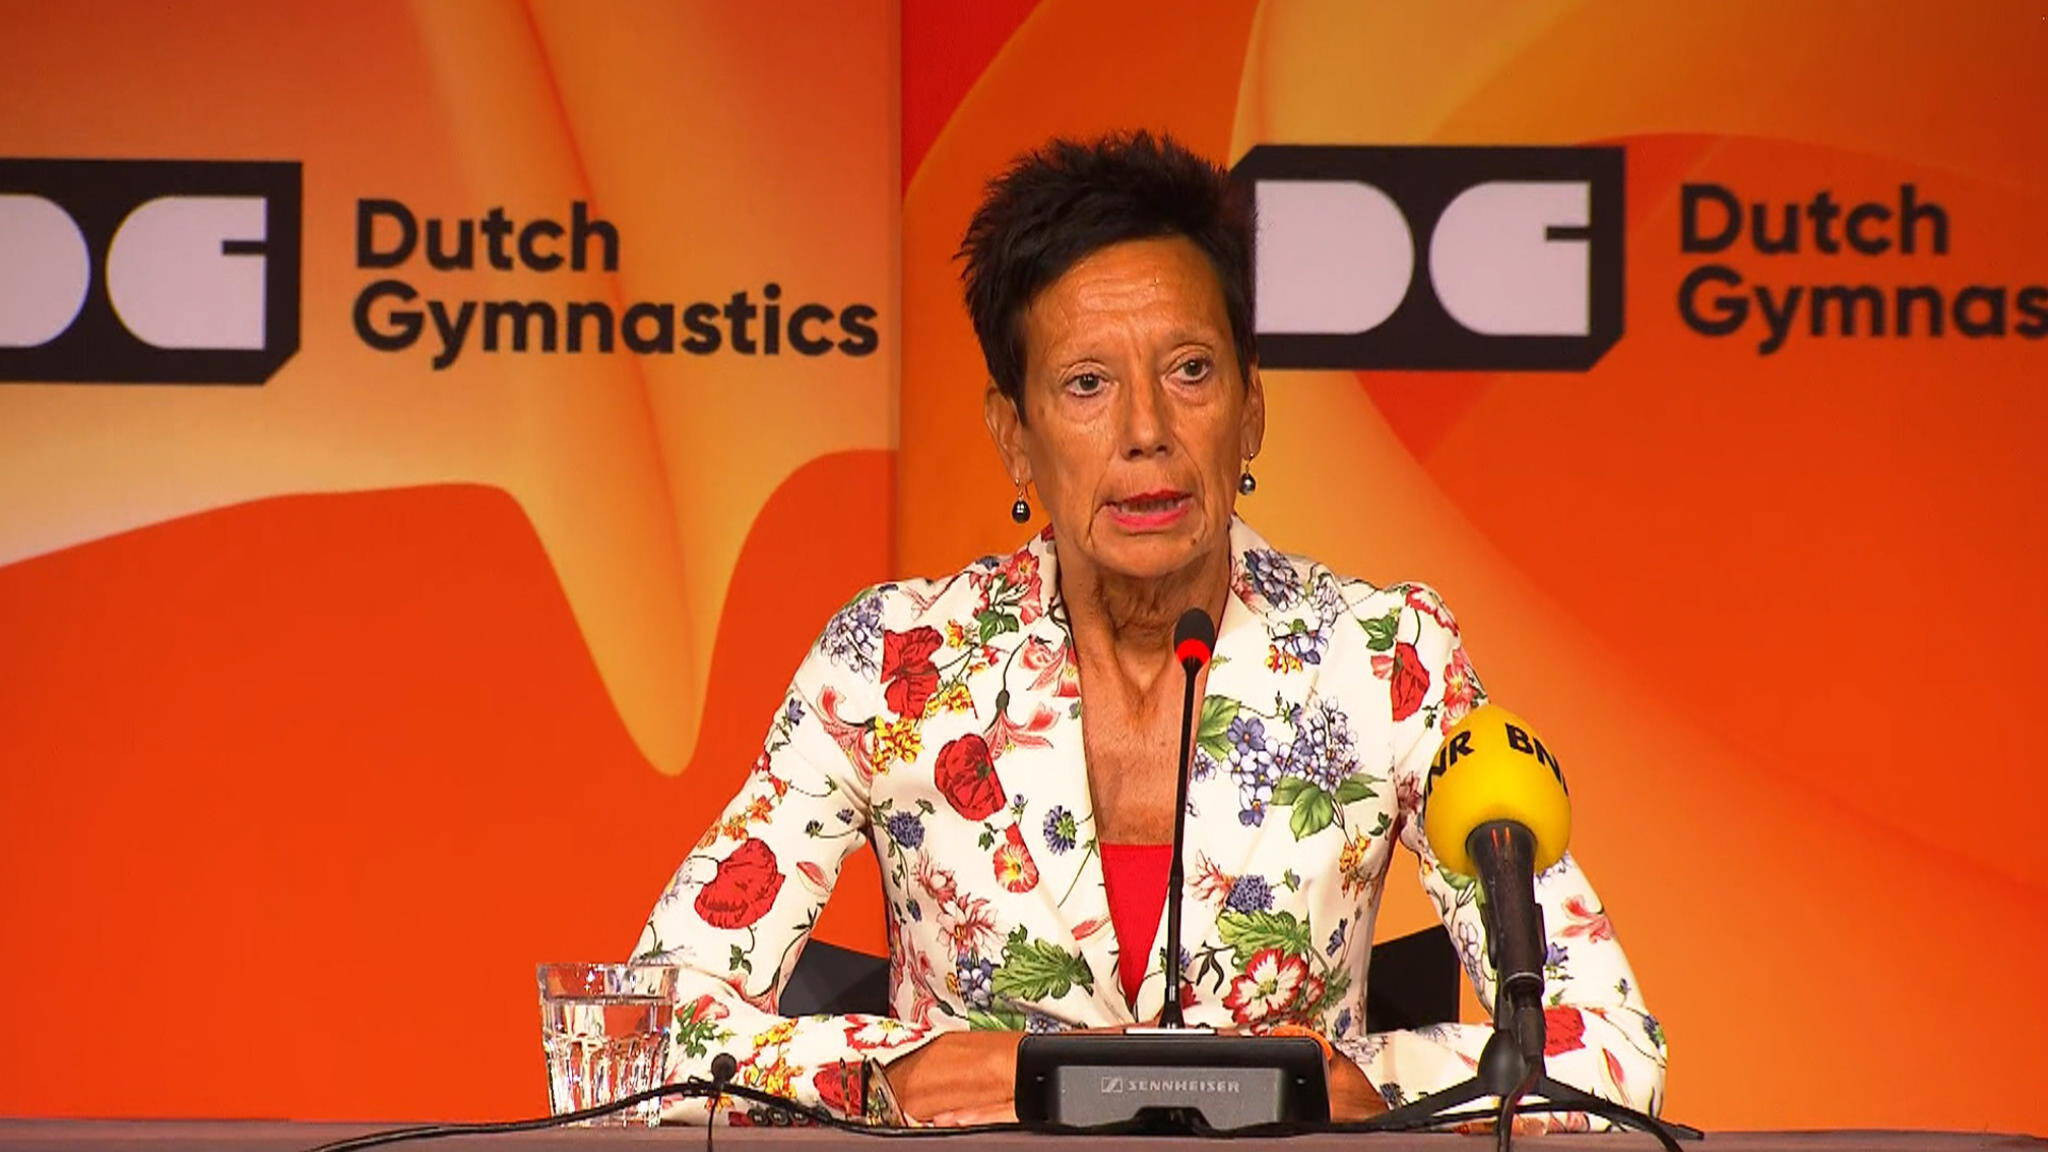 Royal Dutch Gymnastics Union President Monique Kempff promised a press action they would strong action following allegations of abuse in The Netherlands ©YouTube